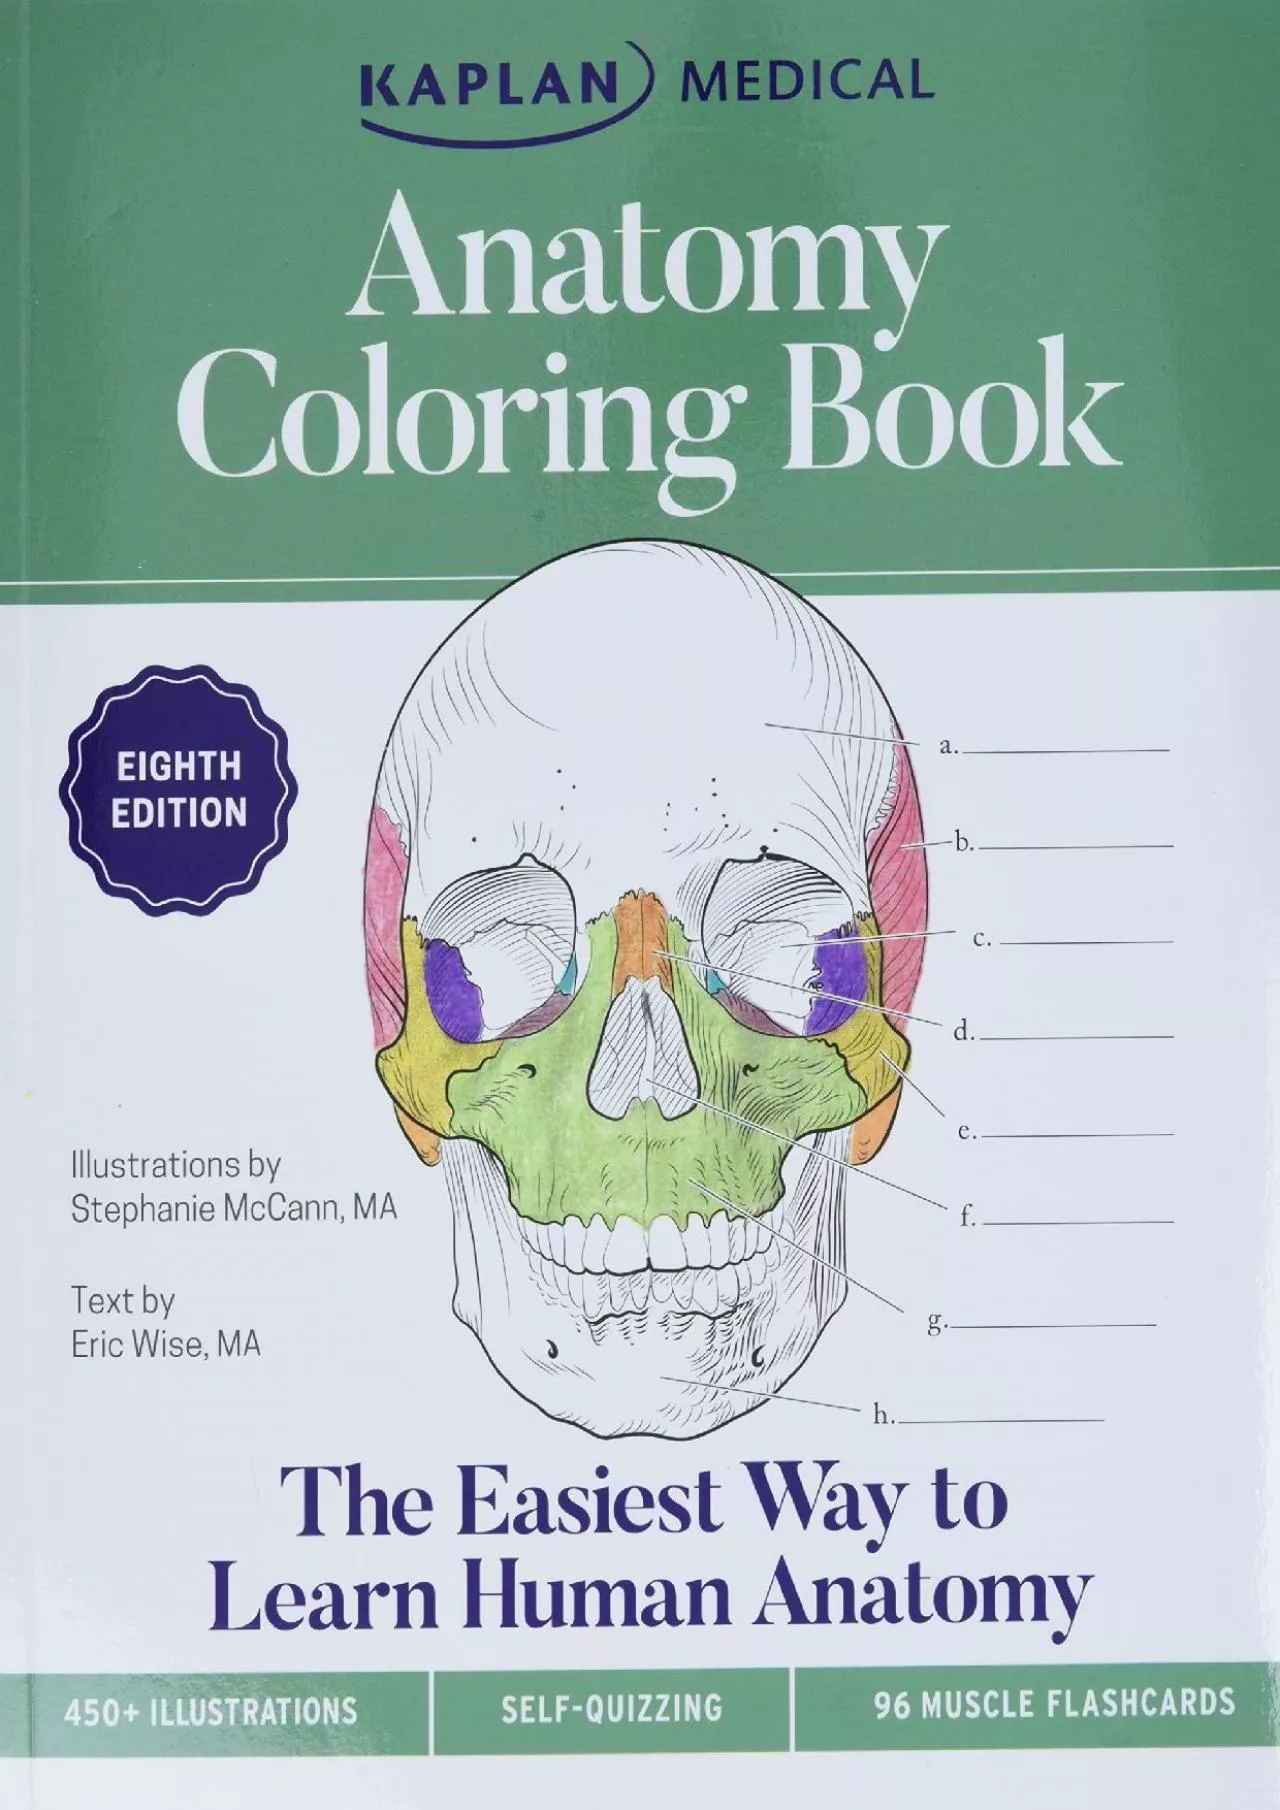 [READ] Anatomy Coloring Book with 450+ Realistic Medical Illustrations with Quizzes for